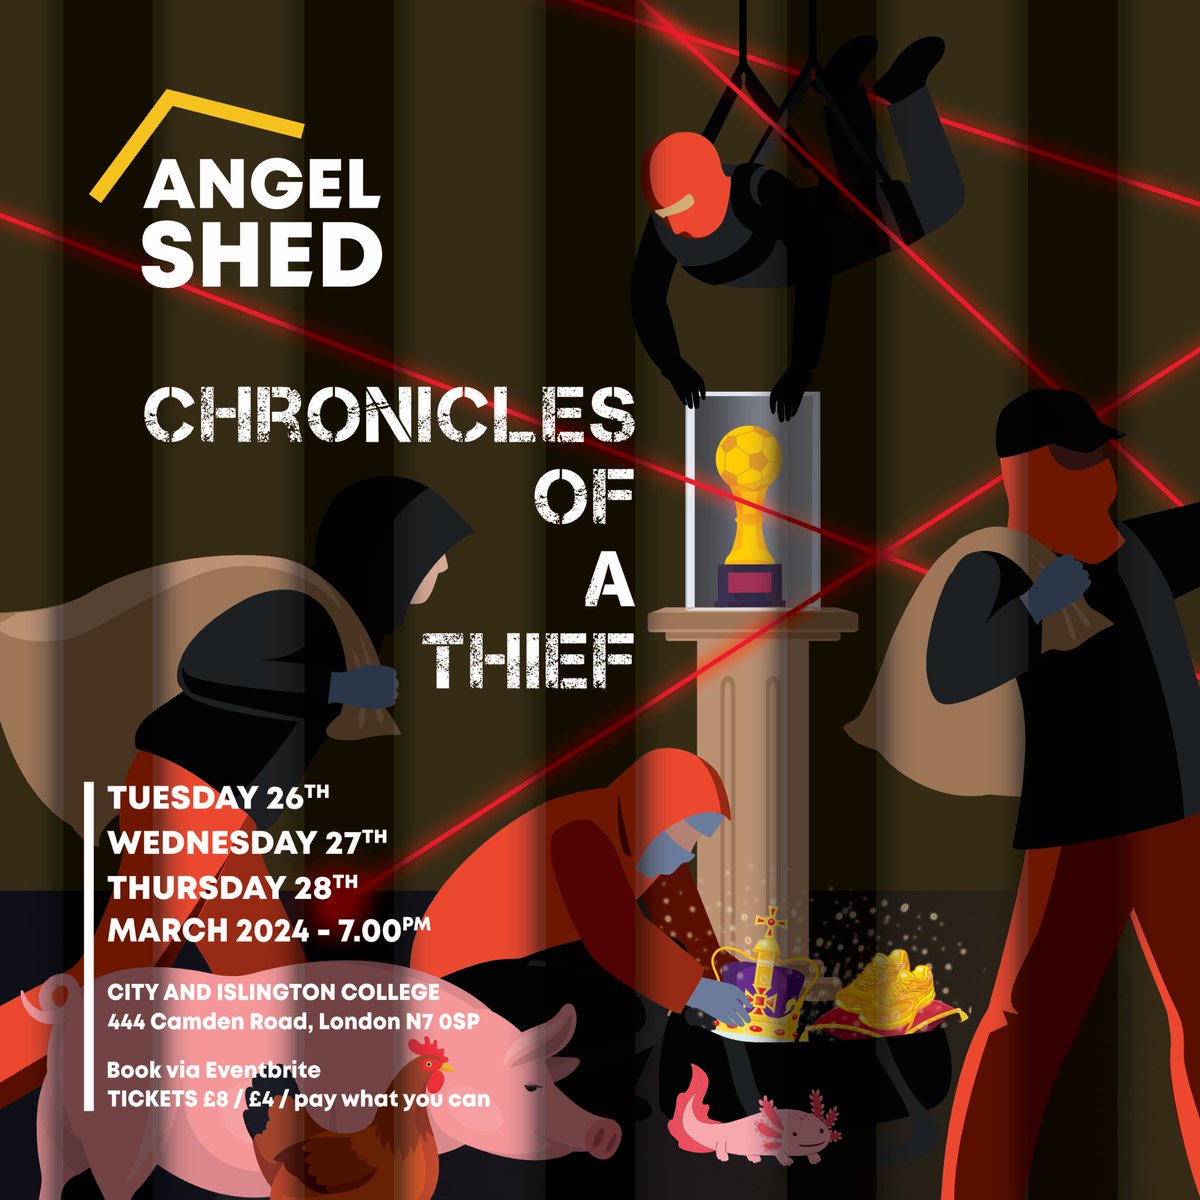 Youth Theatre 1 (ages 10-13) present their brand new original production 'Chronicles of a Thief'. 📆 Tuesday 26th, Wednesday 27th and Thursday 28th March ⏰ 7pm 🏠444 Camden Road, N7 0SP Ticket link in bio 🎟️